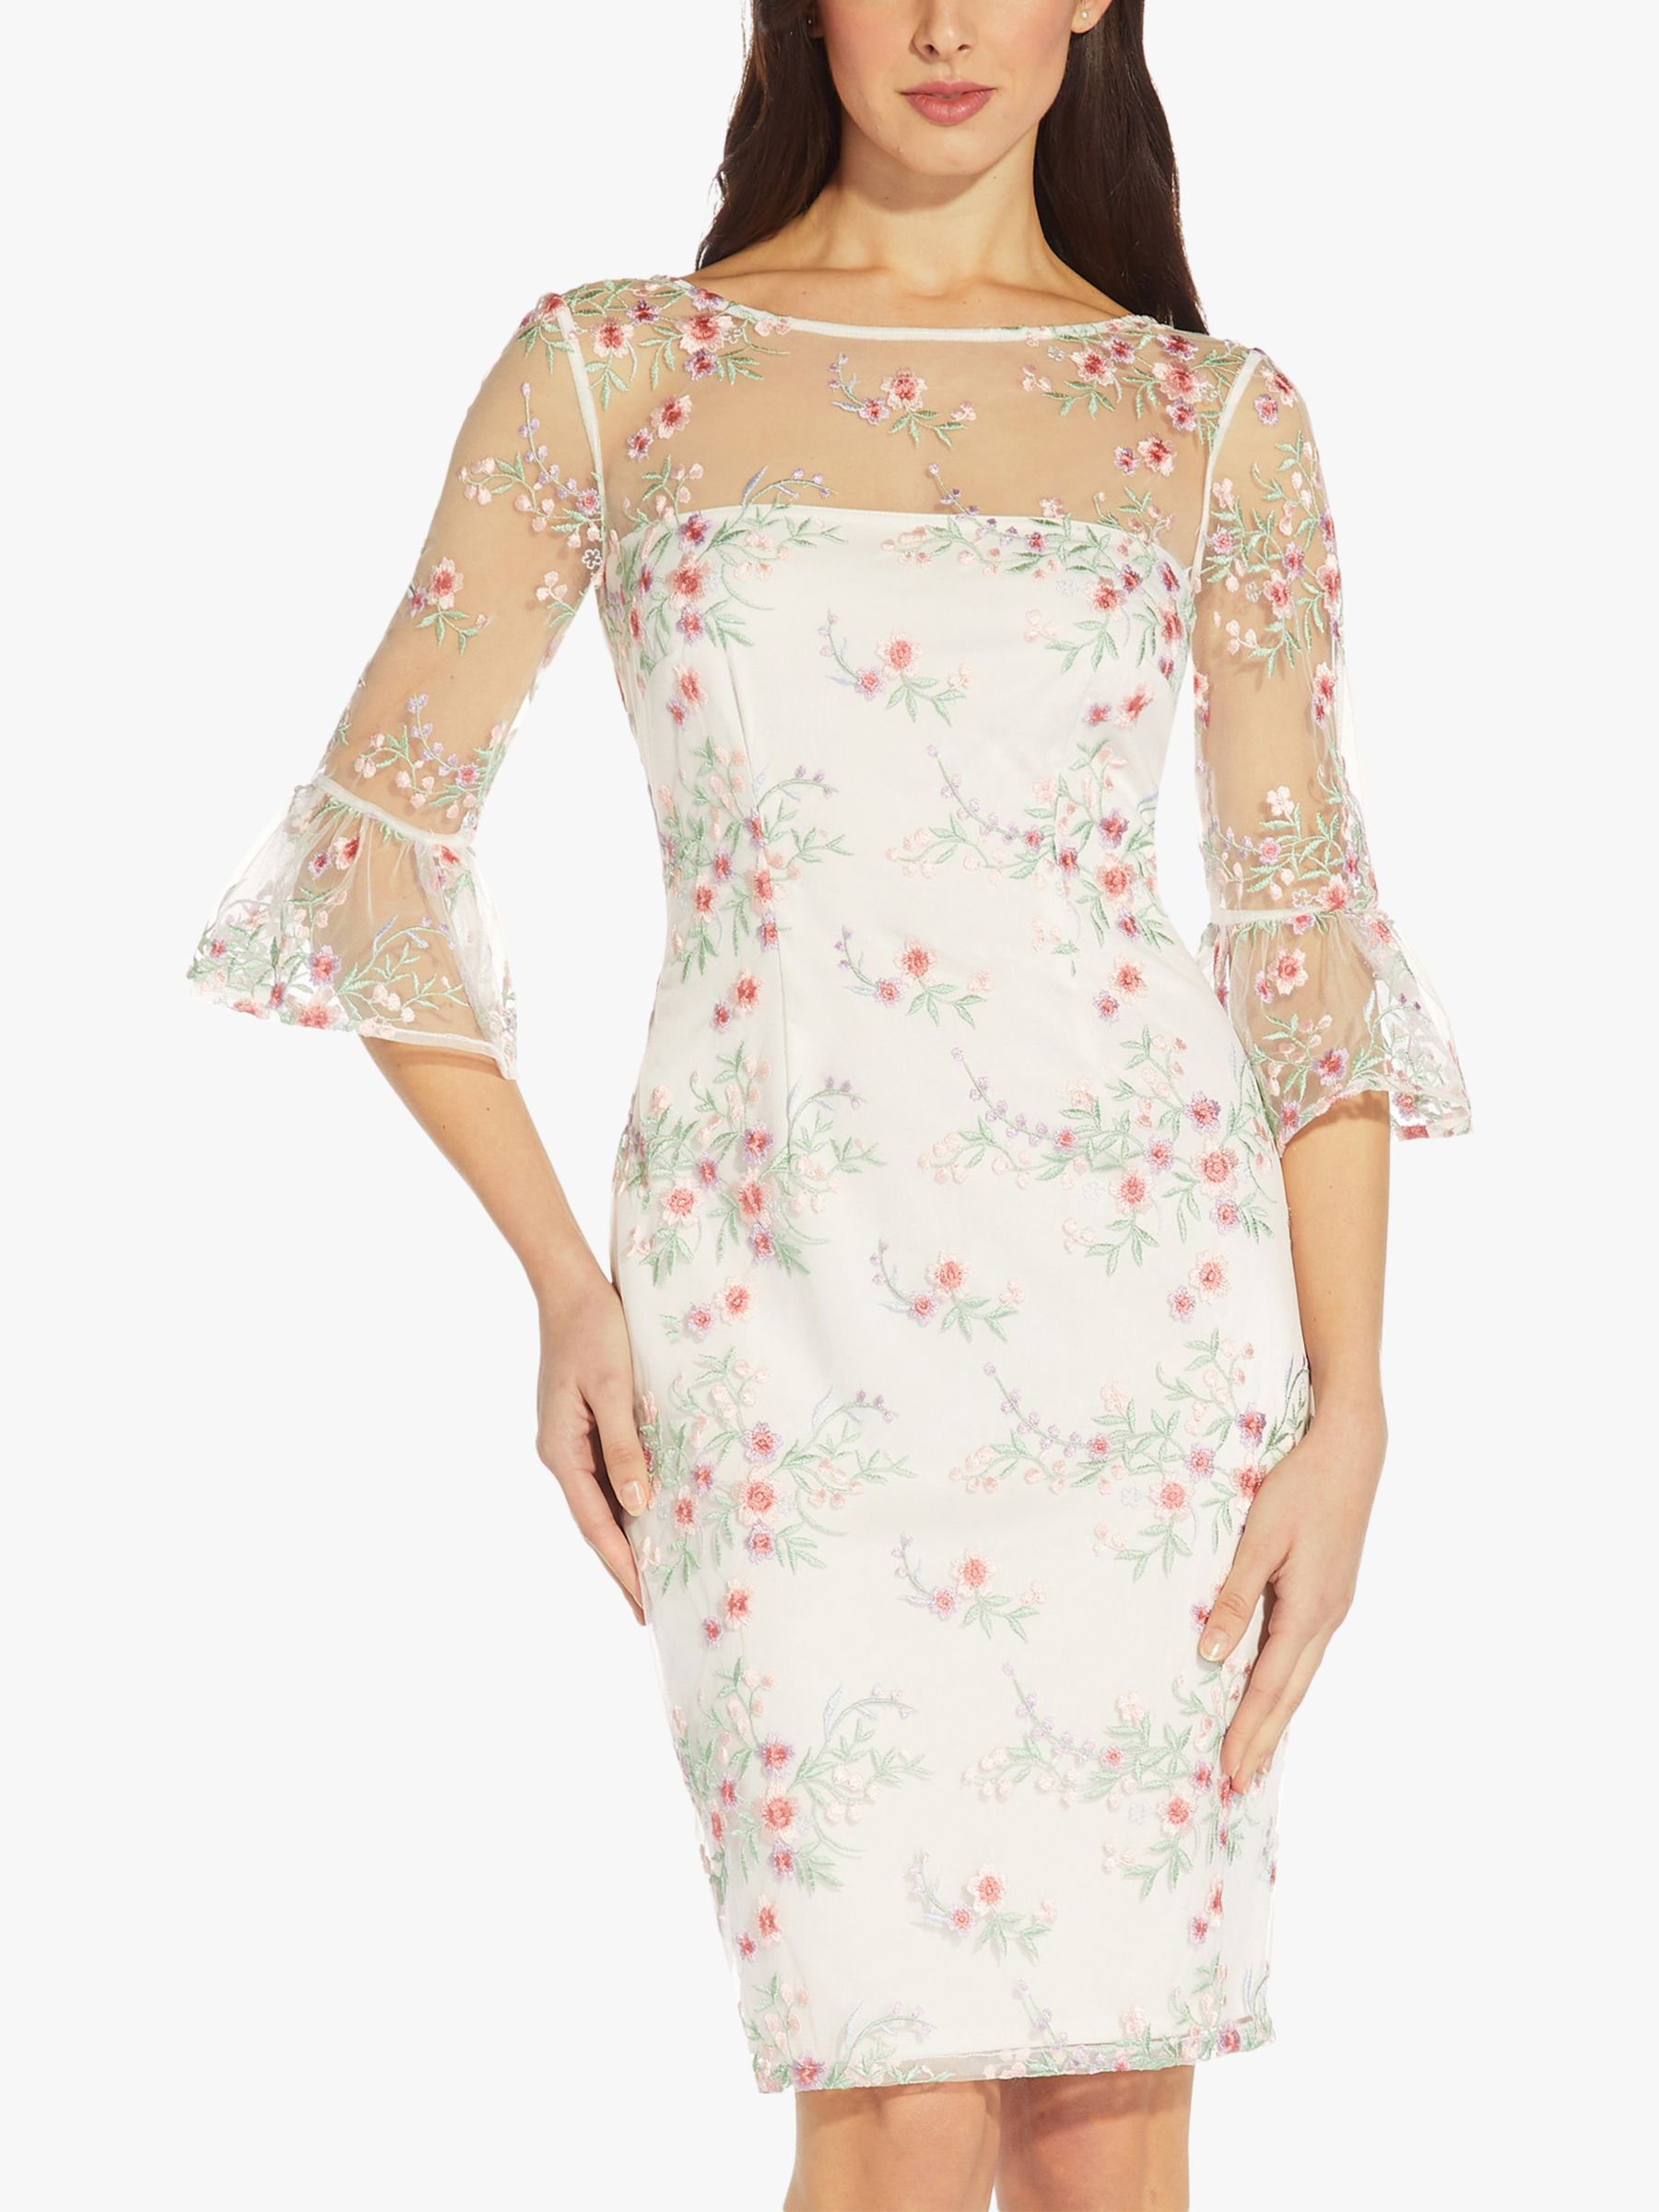 Adrianna Papell Floral Embroidered Bell Sleeve Dress, Pink/Multi, 12